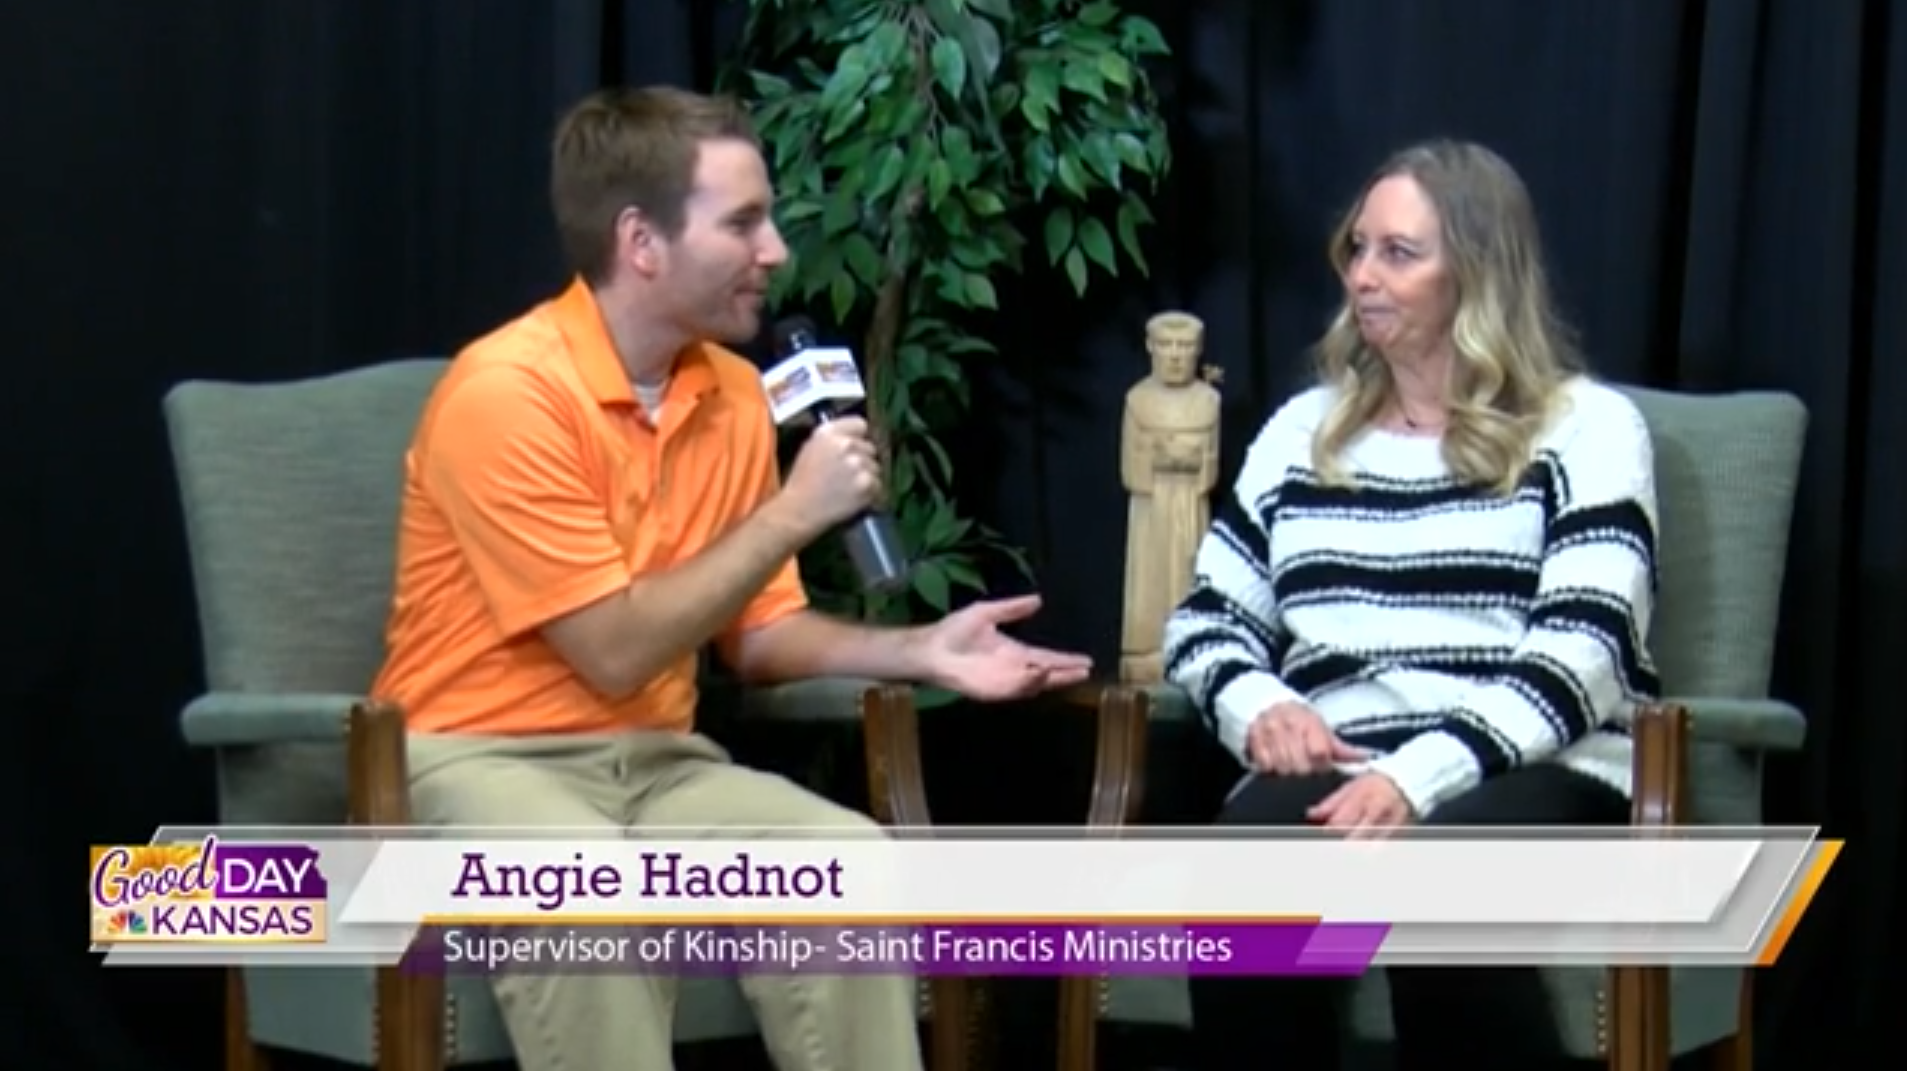 A man in an orange polo shirt is interviewing a woman in a black and white striped sweater. They are seated in chairs on a stage with a small statue and a plant in the background. The screen text reads "Good Day Kansas," "Angie Hadnot," and "Supervisor of Kinship - Saint Francis Ministries.